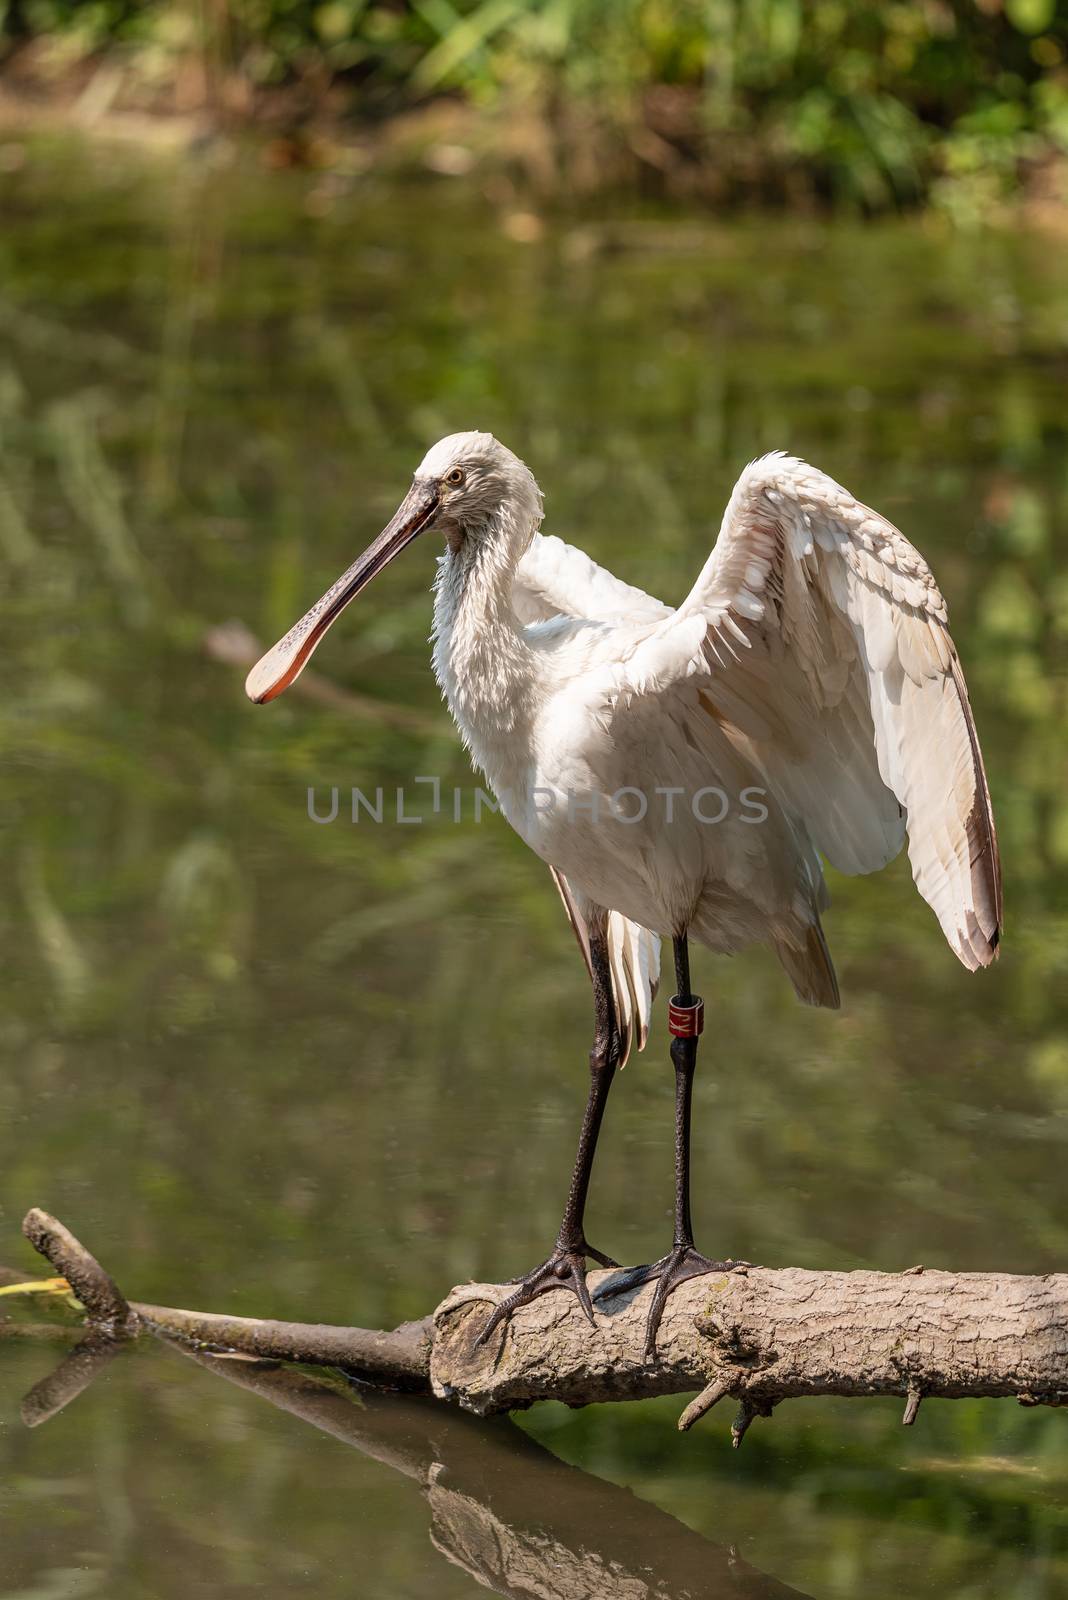 Eurasian common spoonbill opens wings on a tree branch in a pond, image of white bird with large flat beak